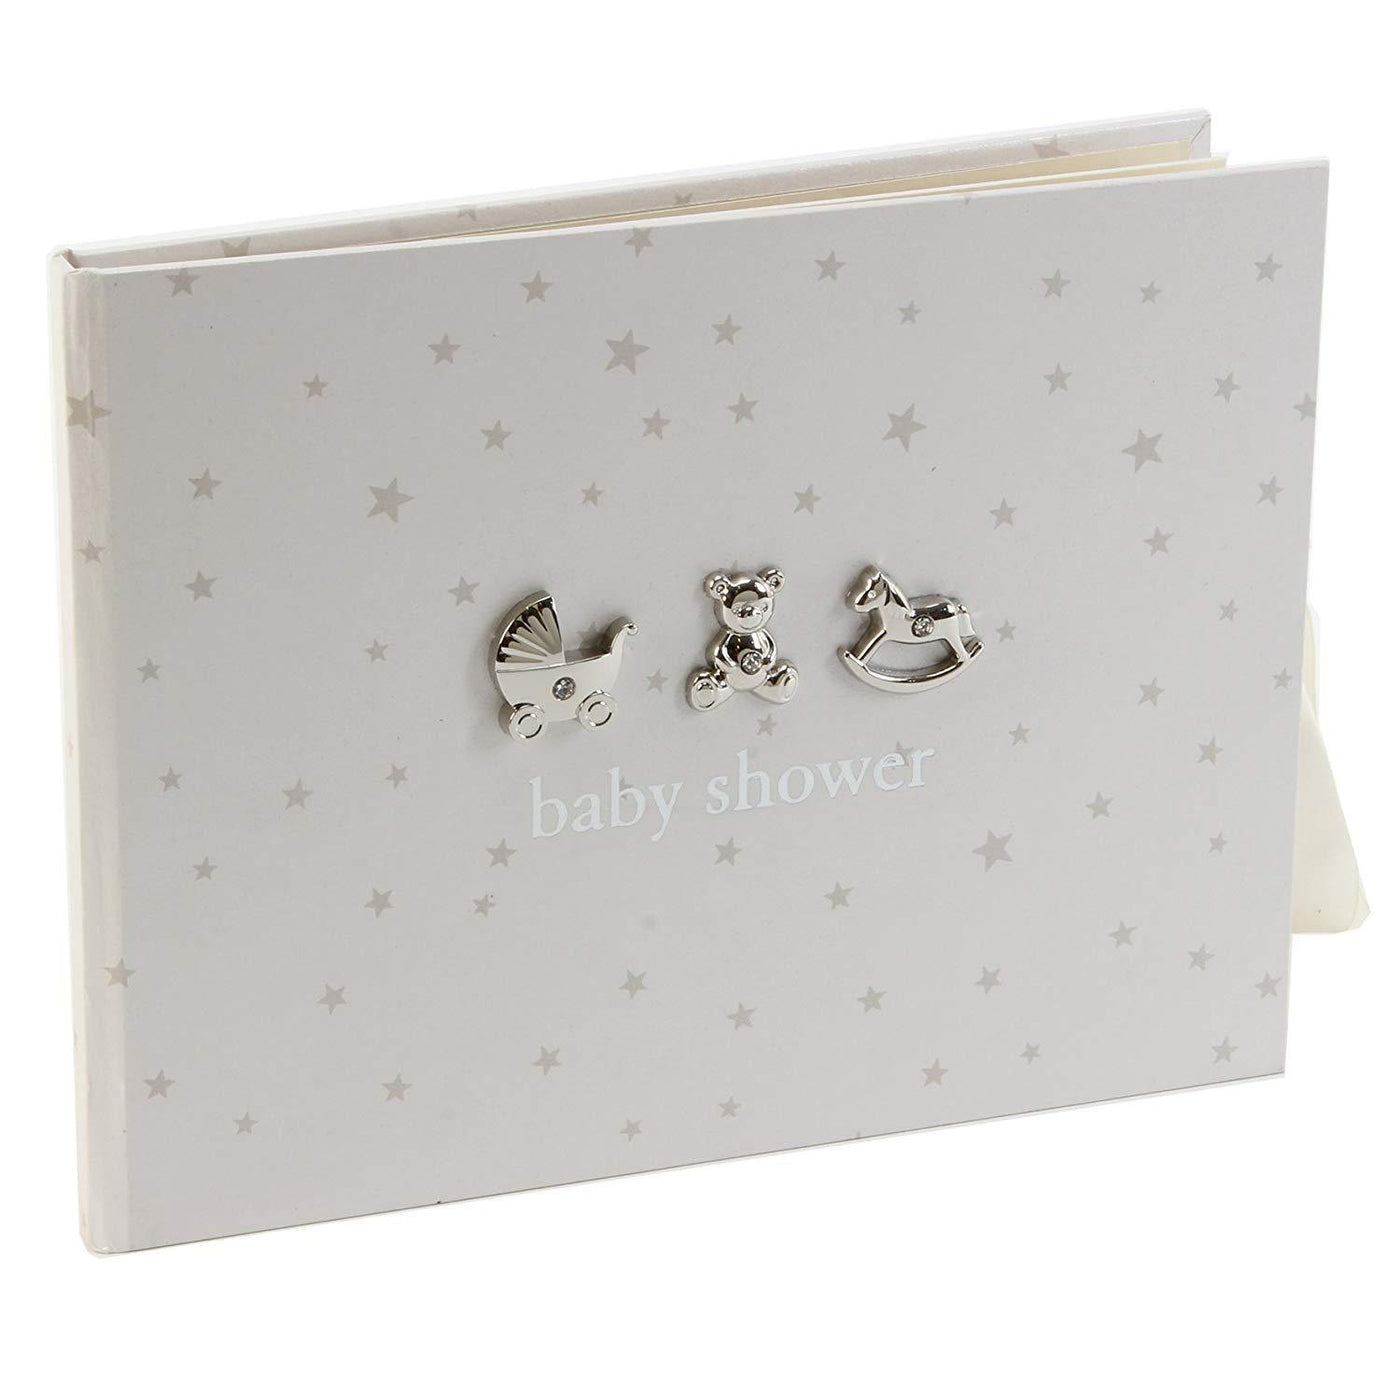 Widdop Gifts Guest Books Bambino Baby Shower Guest Book